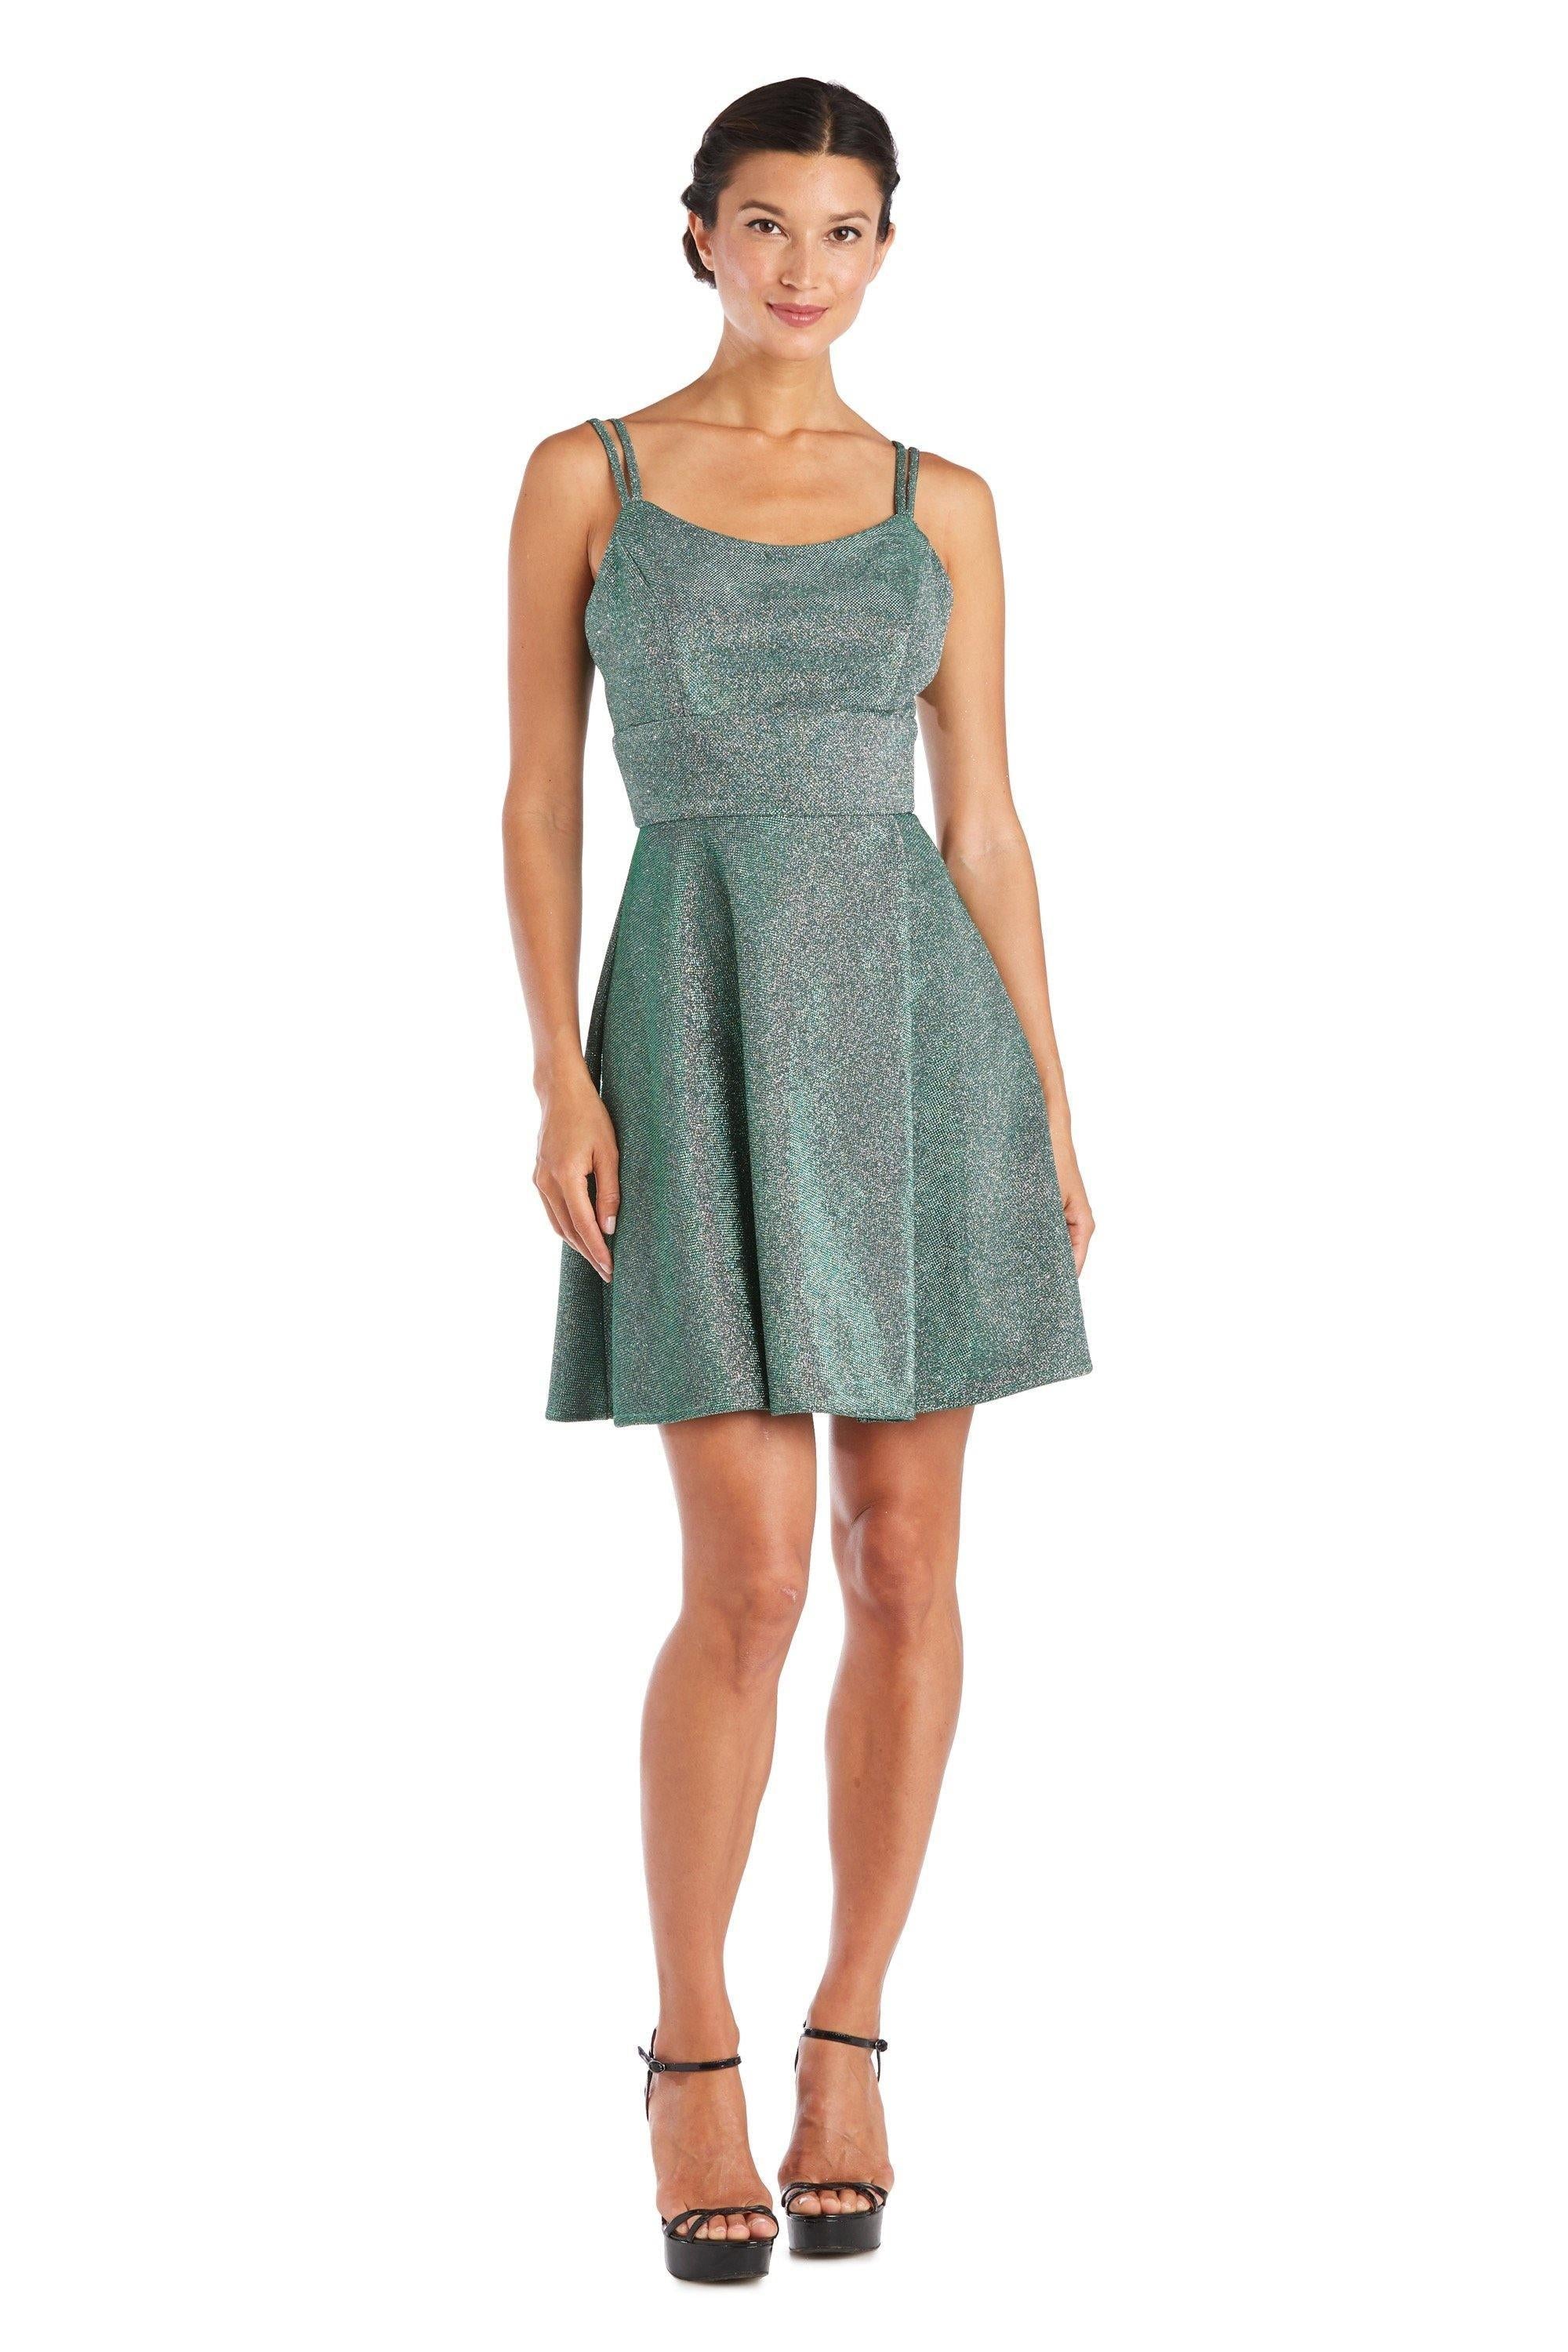 Morgan & Co. Homecoming Prom Short Dress 12730 Sale - The Dress Outlet